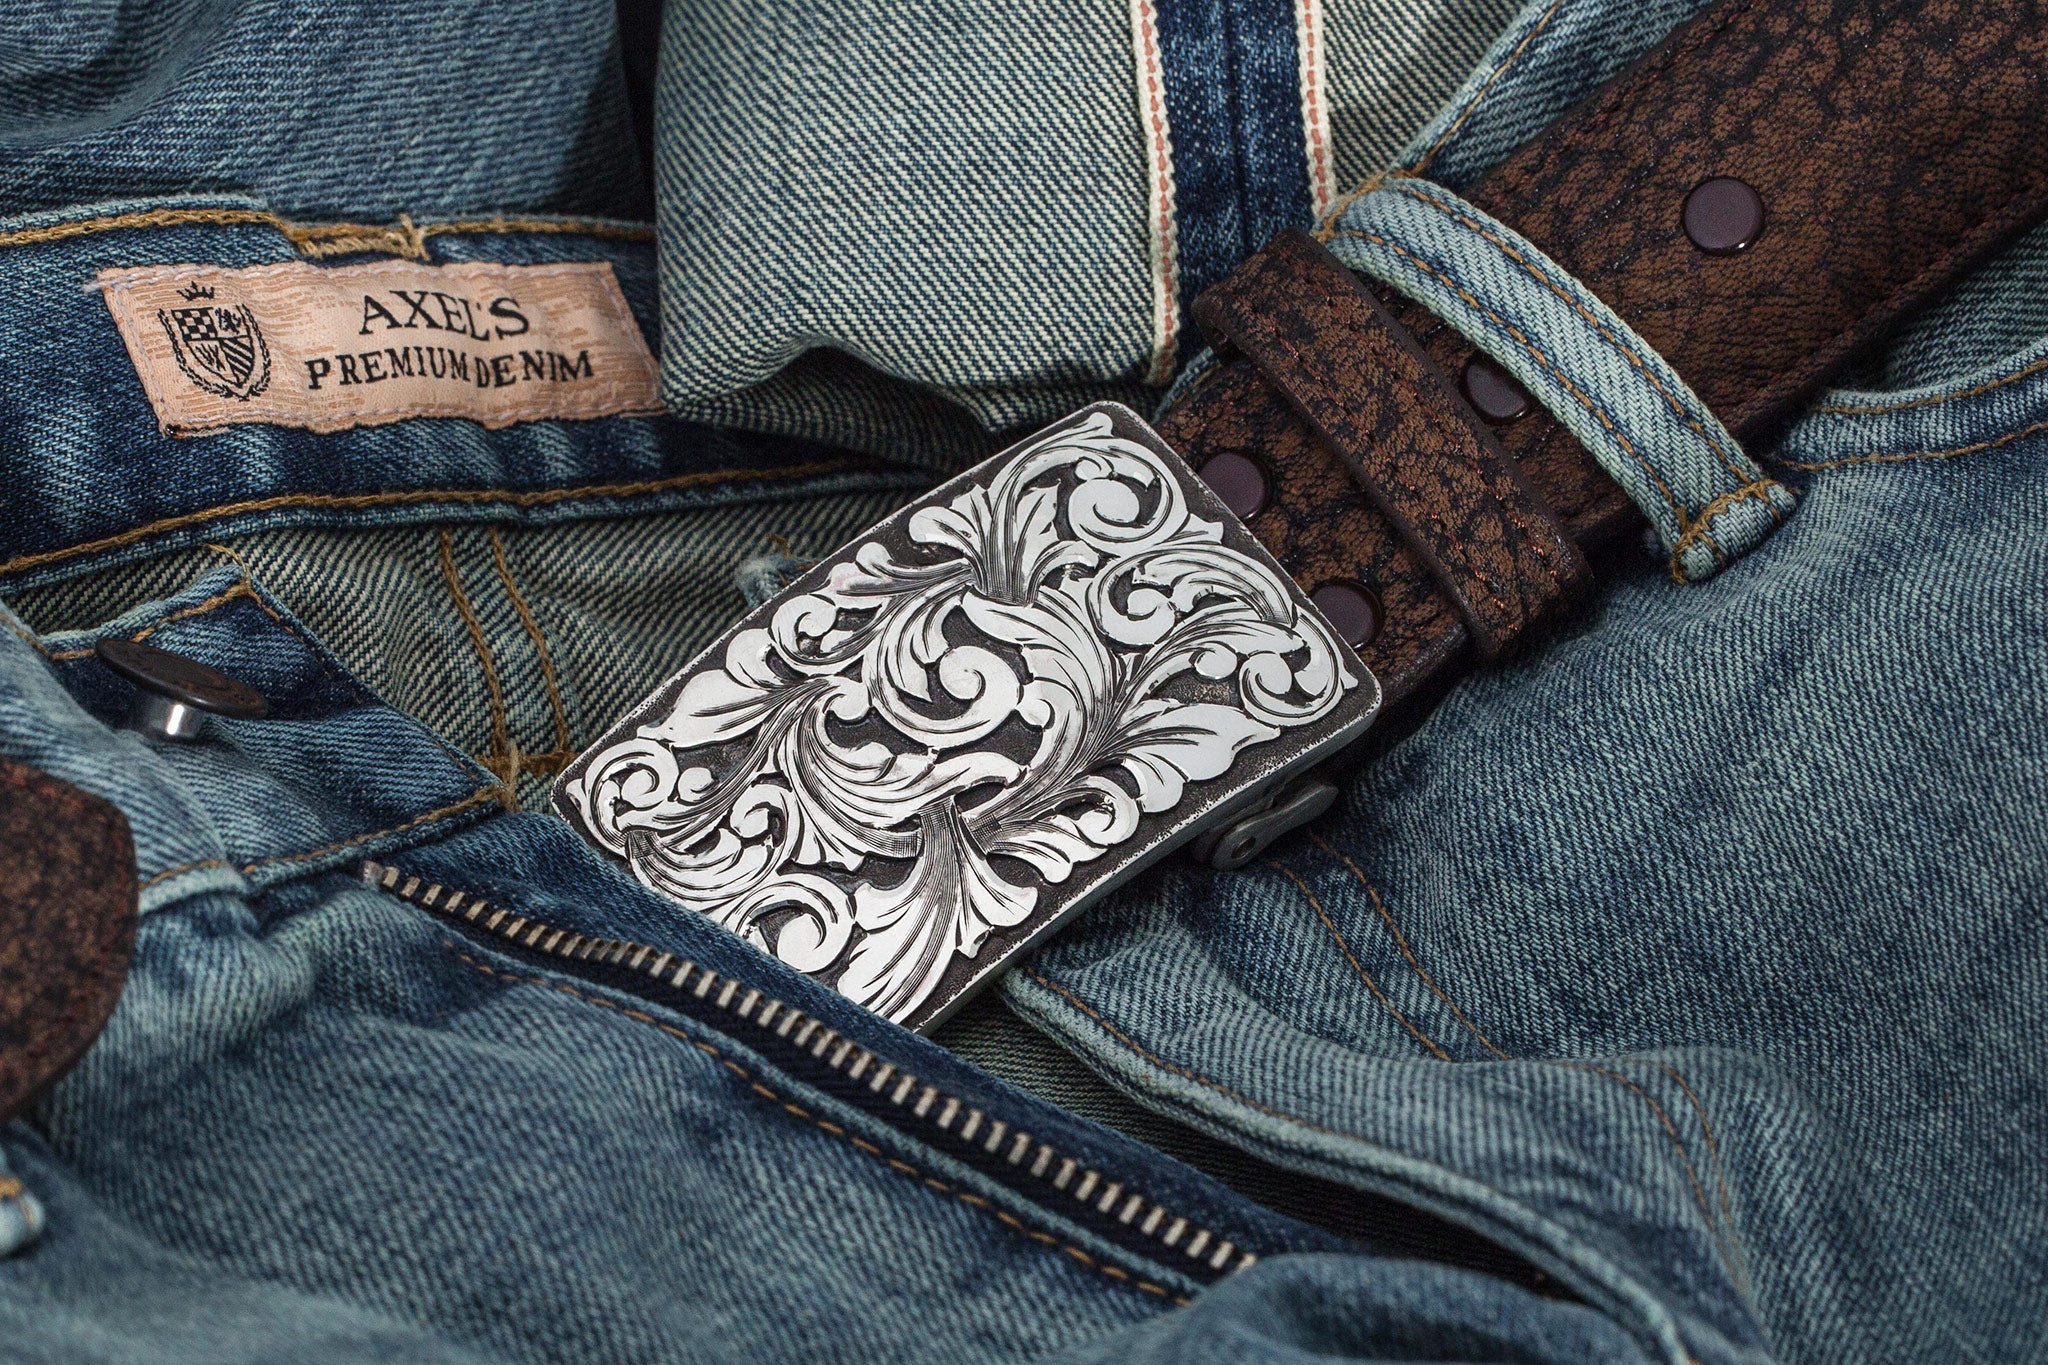 AO Hawes Swirl Belt Buckle | Belts And Buckles - Trophy | Comstock Heritage